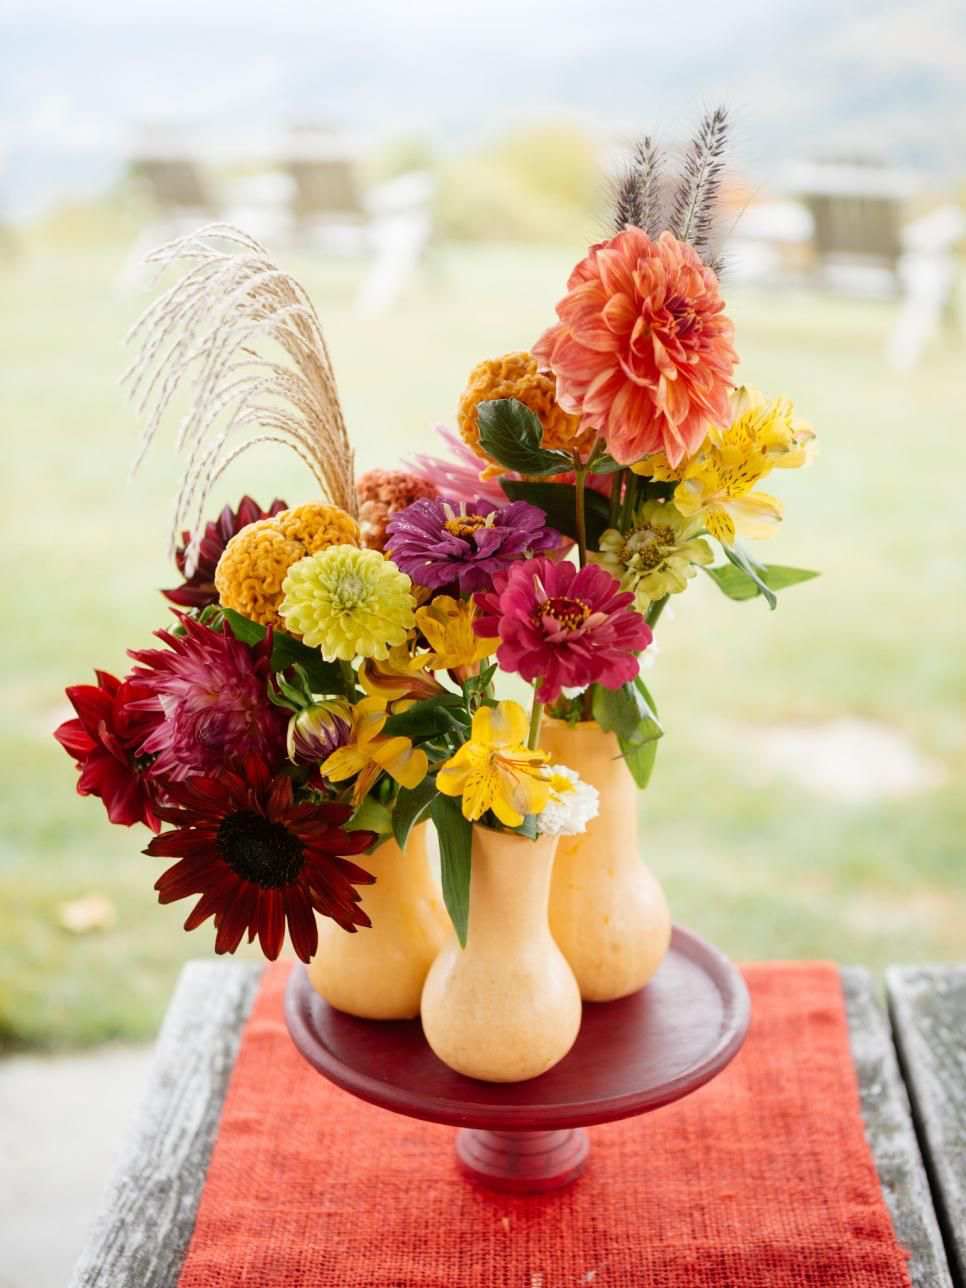 Autumn table decoration with Dahlien flower sticks in pumpkins arranging ideas for decoration for the dinner party